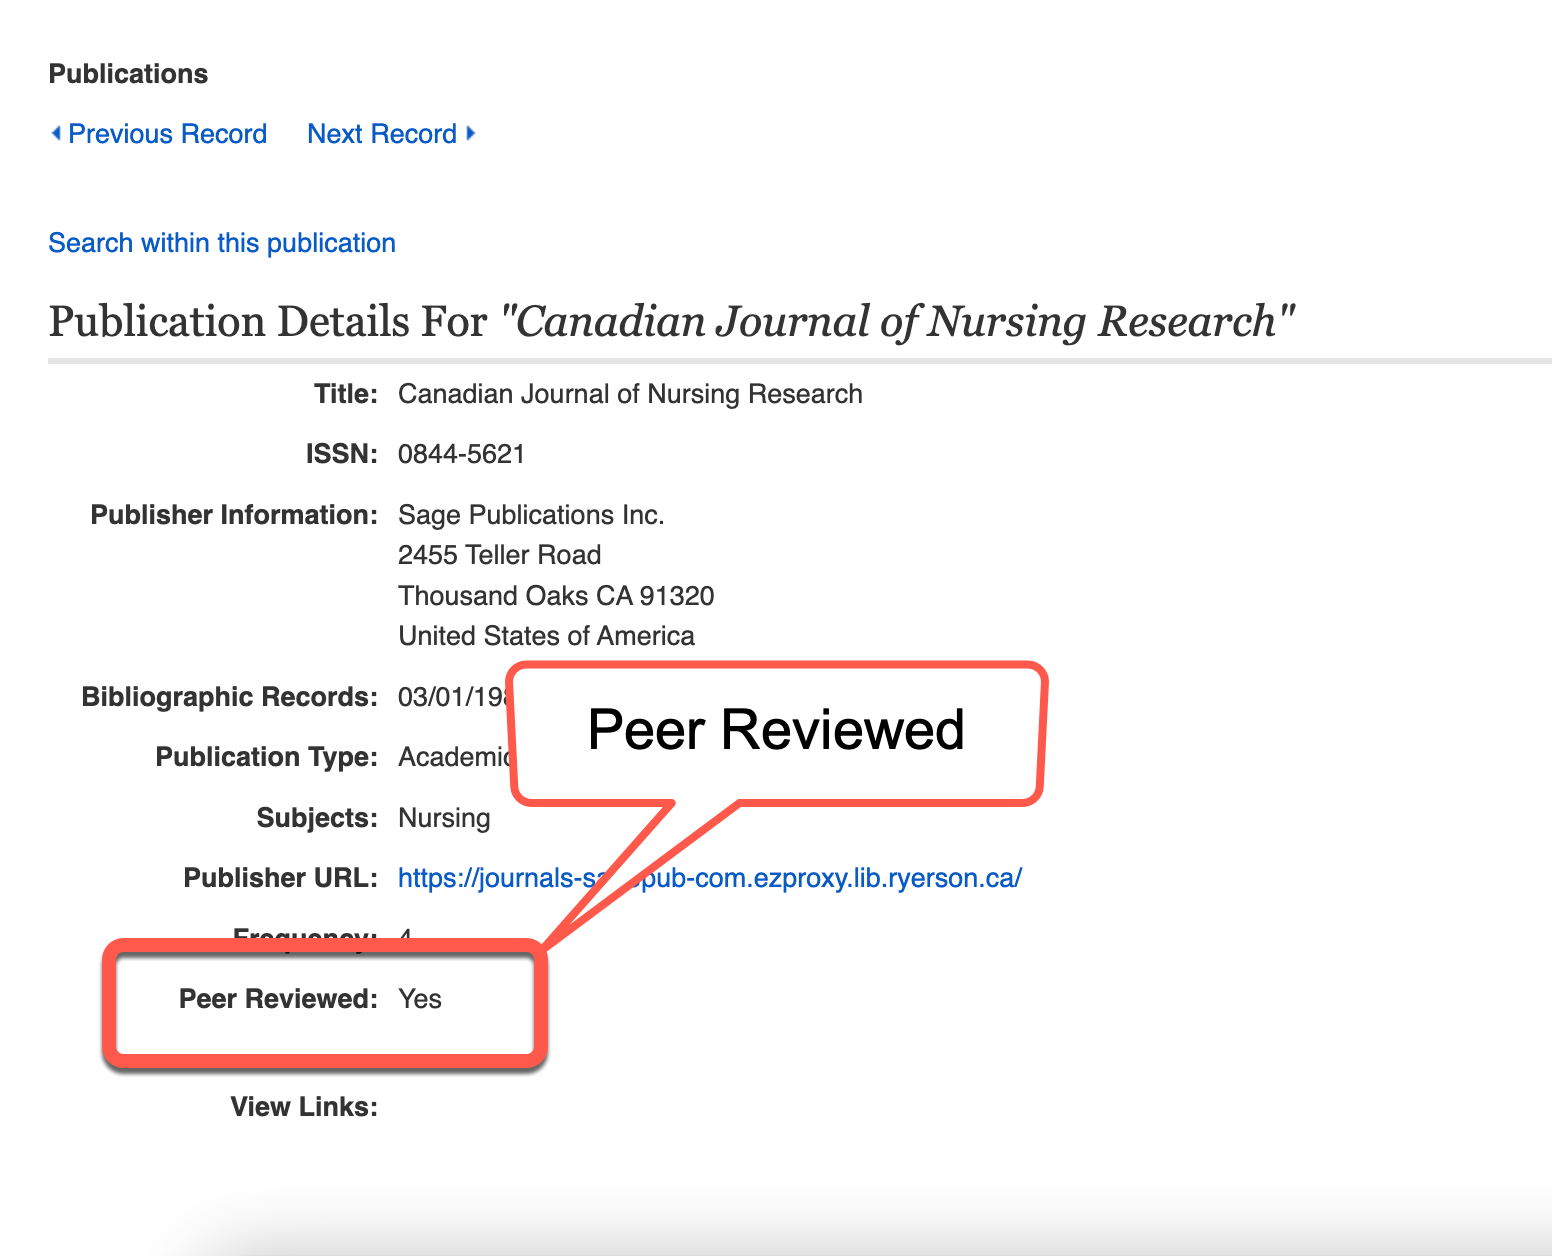 Screenshot of a journal record in a database with "Peer Review" status highlighted